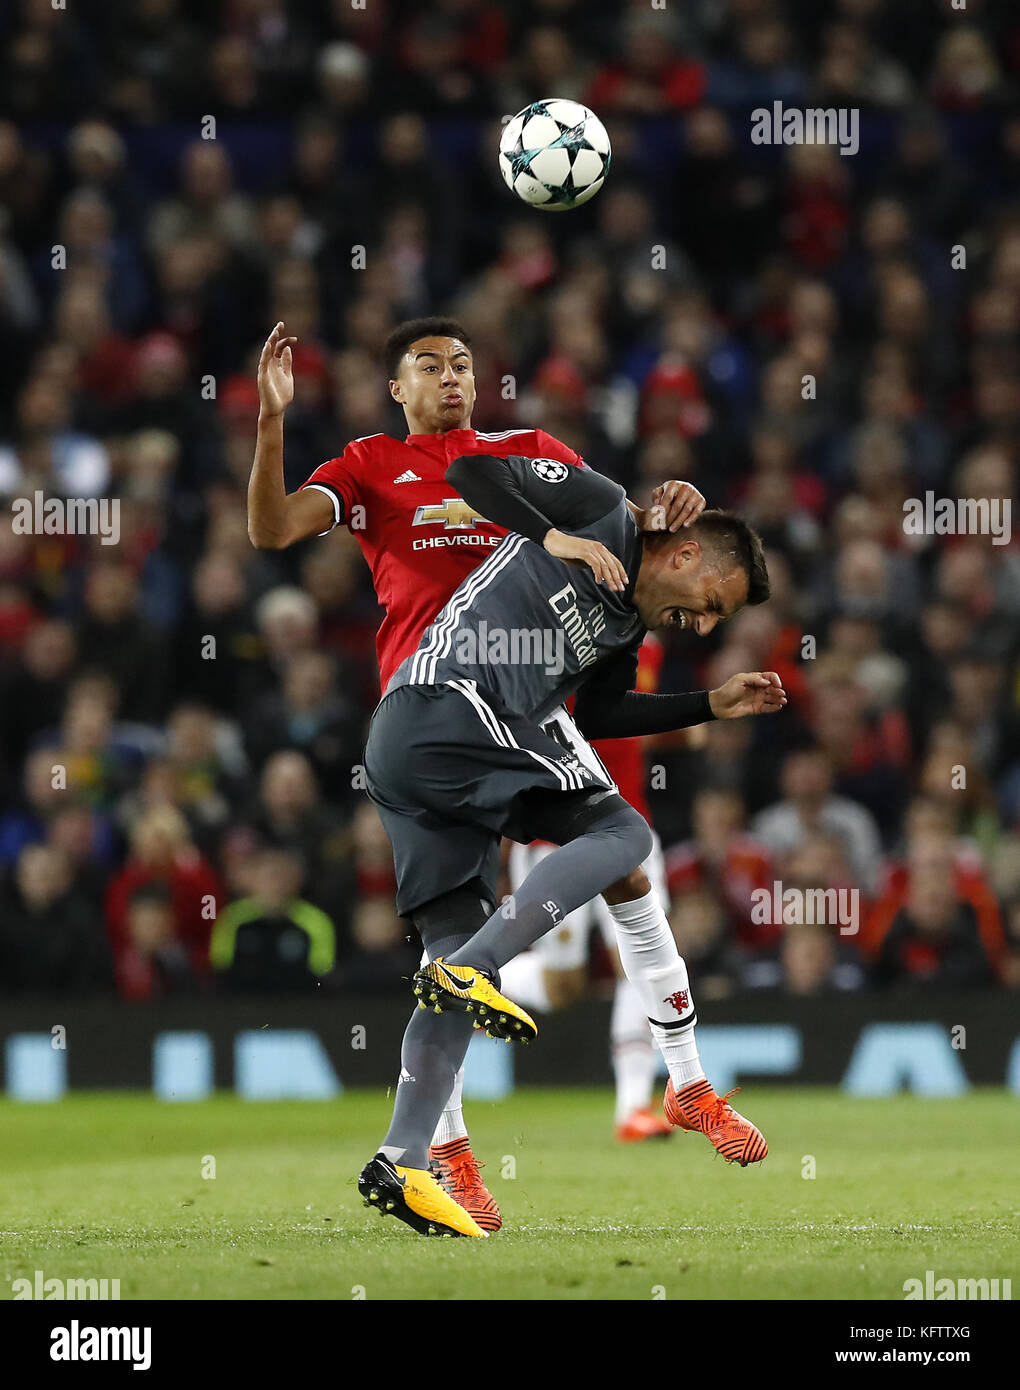 Benfica's Andreas Samaris (left) and Manchester United's Jesse Lingard (right) battle for the ball during the UEFA Champions League, Group A match at Old Trafford, Manchester. Stock Photo